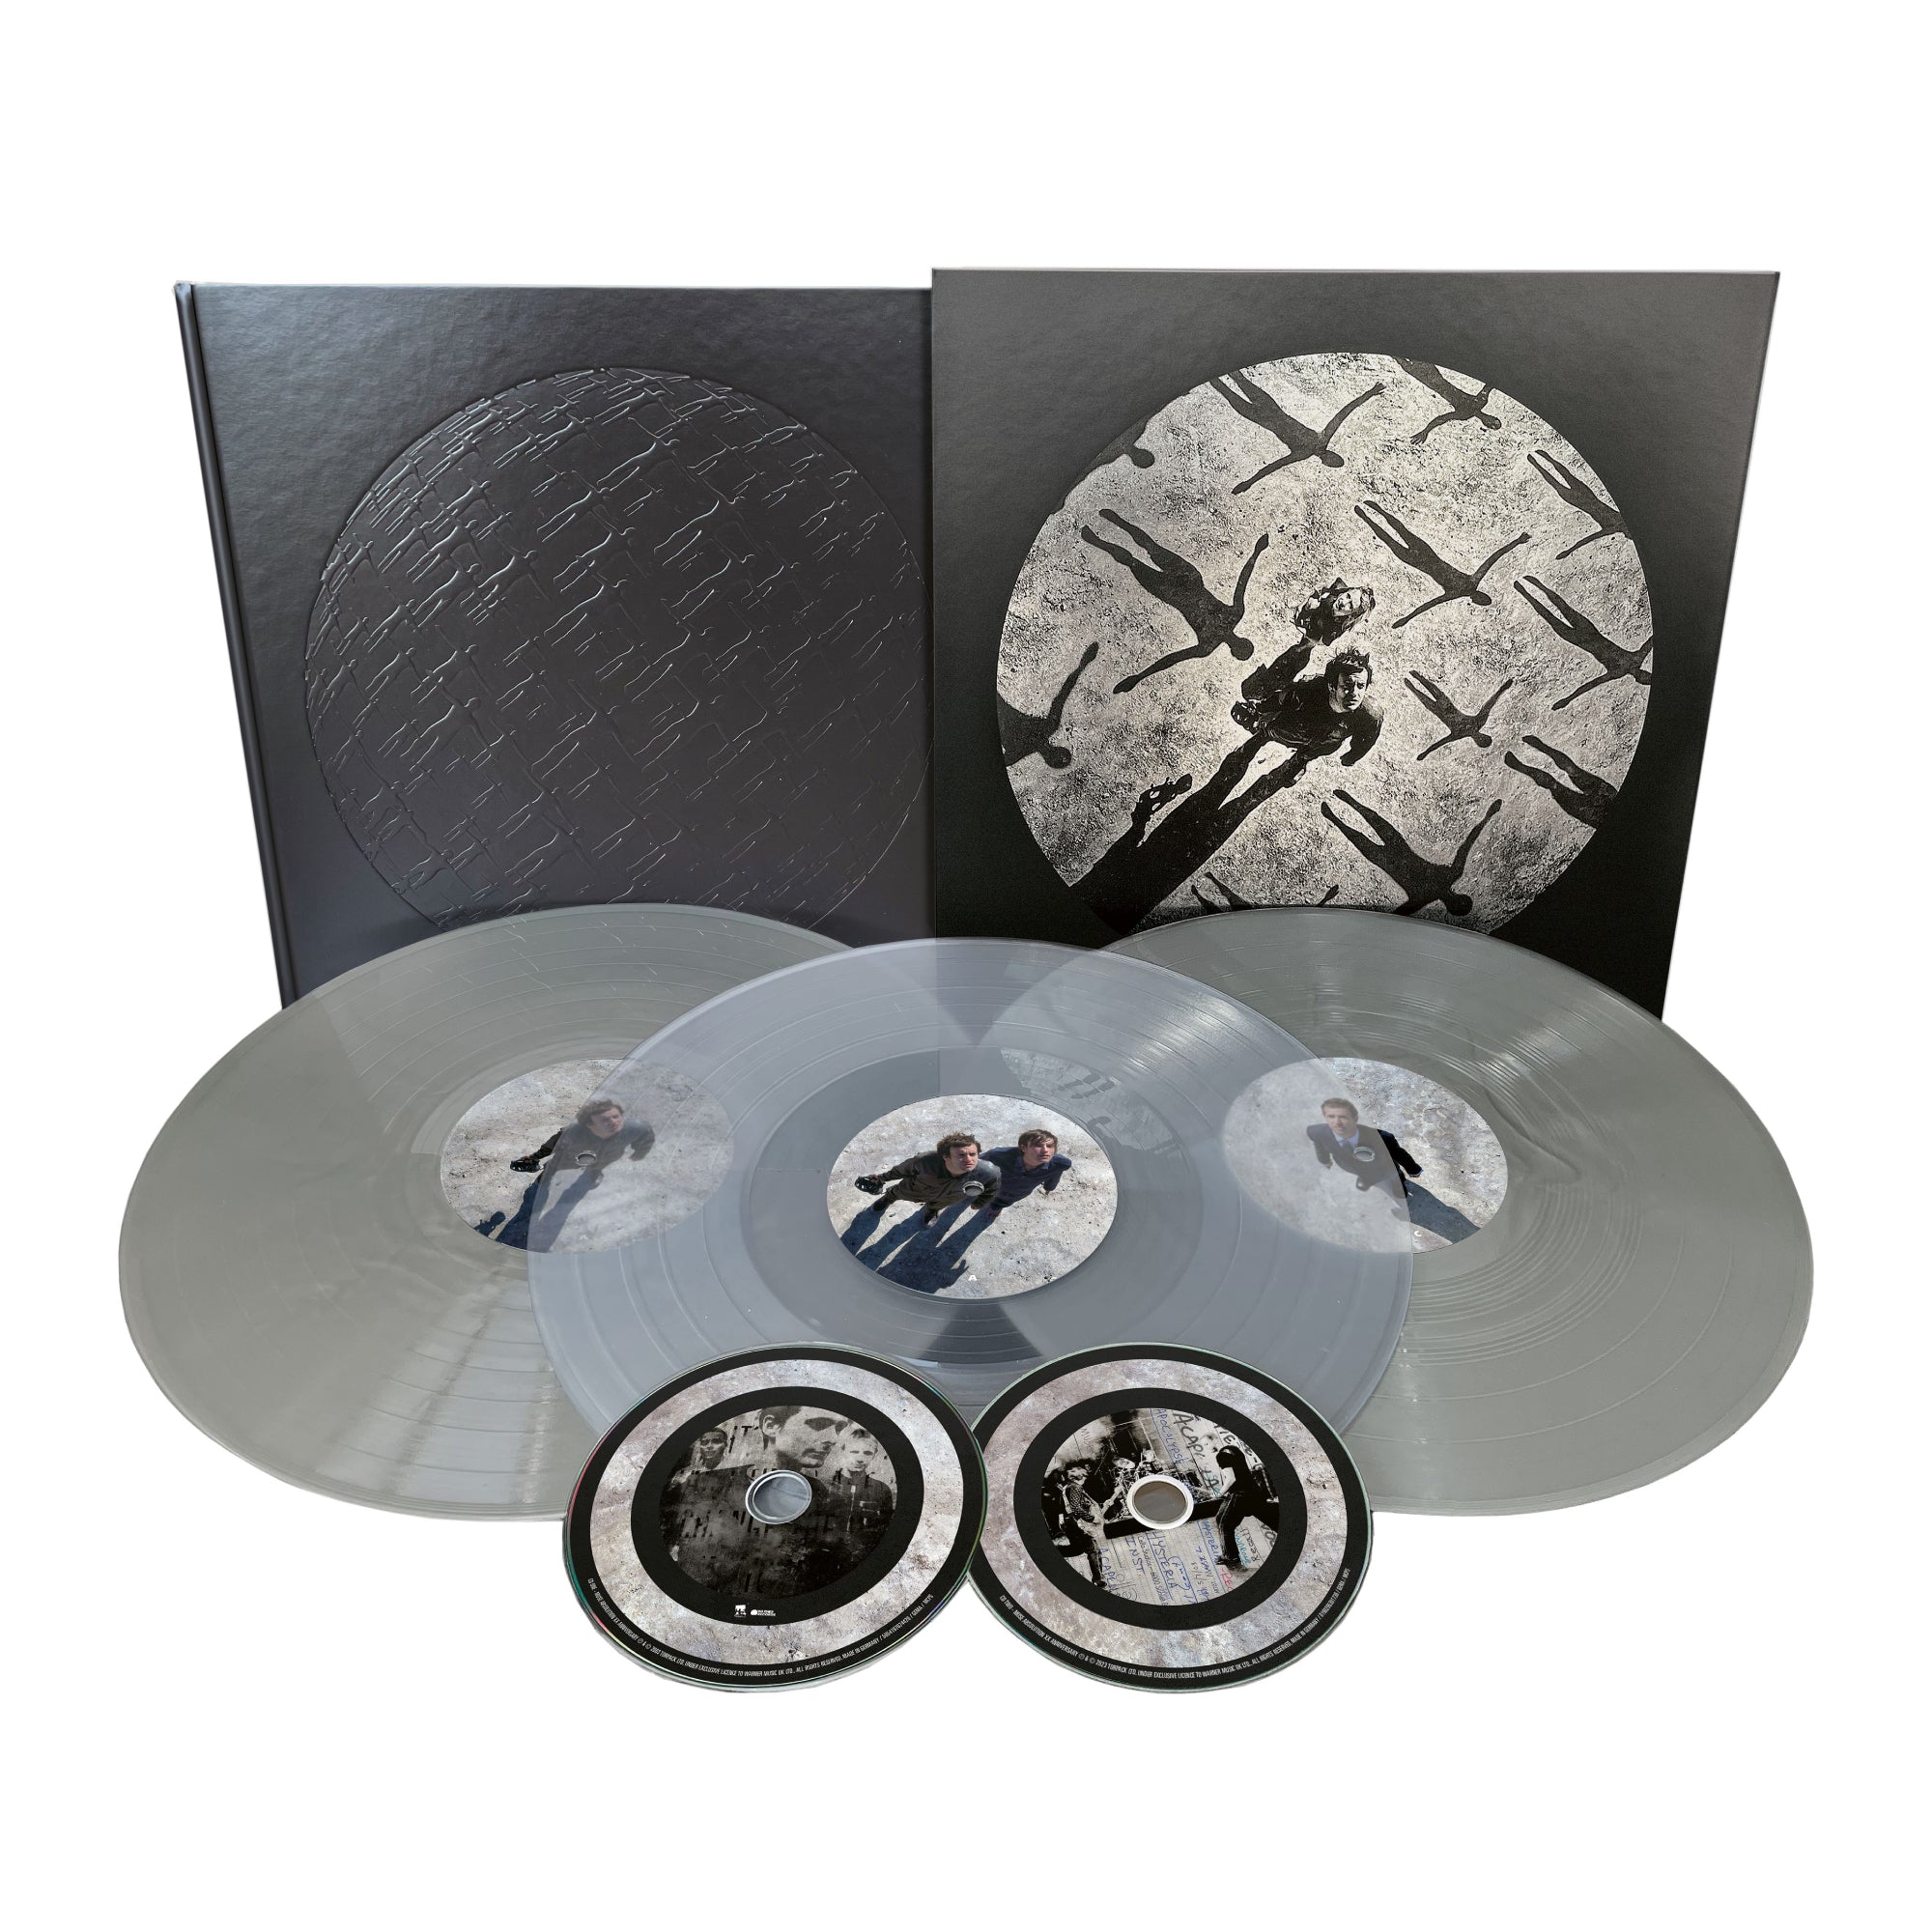 Muse  - Absolution (XX Anniversary): Deluxe Silver/Clear Vinyl 3LP + 2CD Box Set